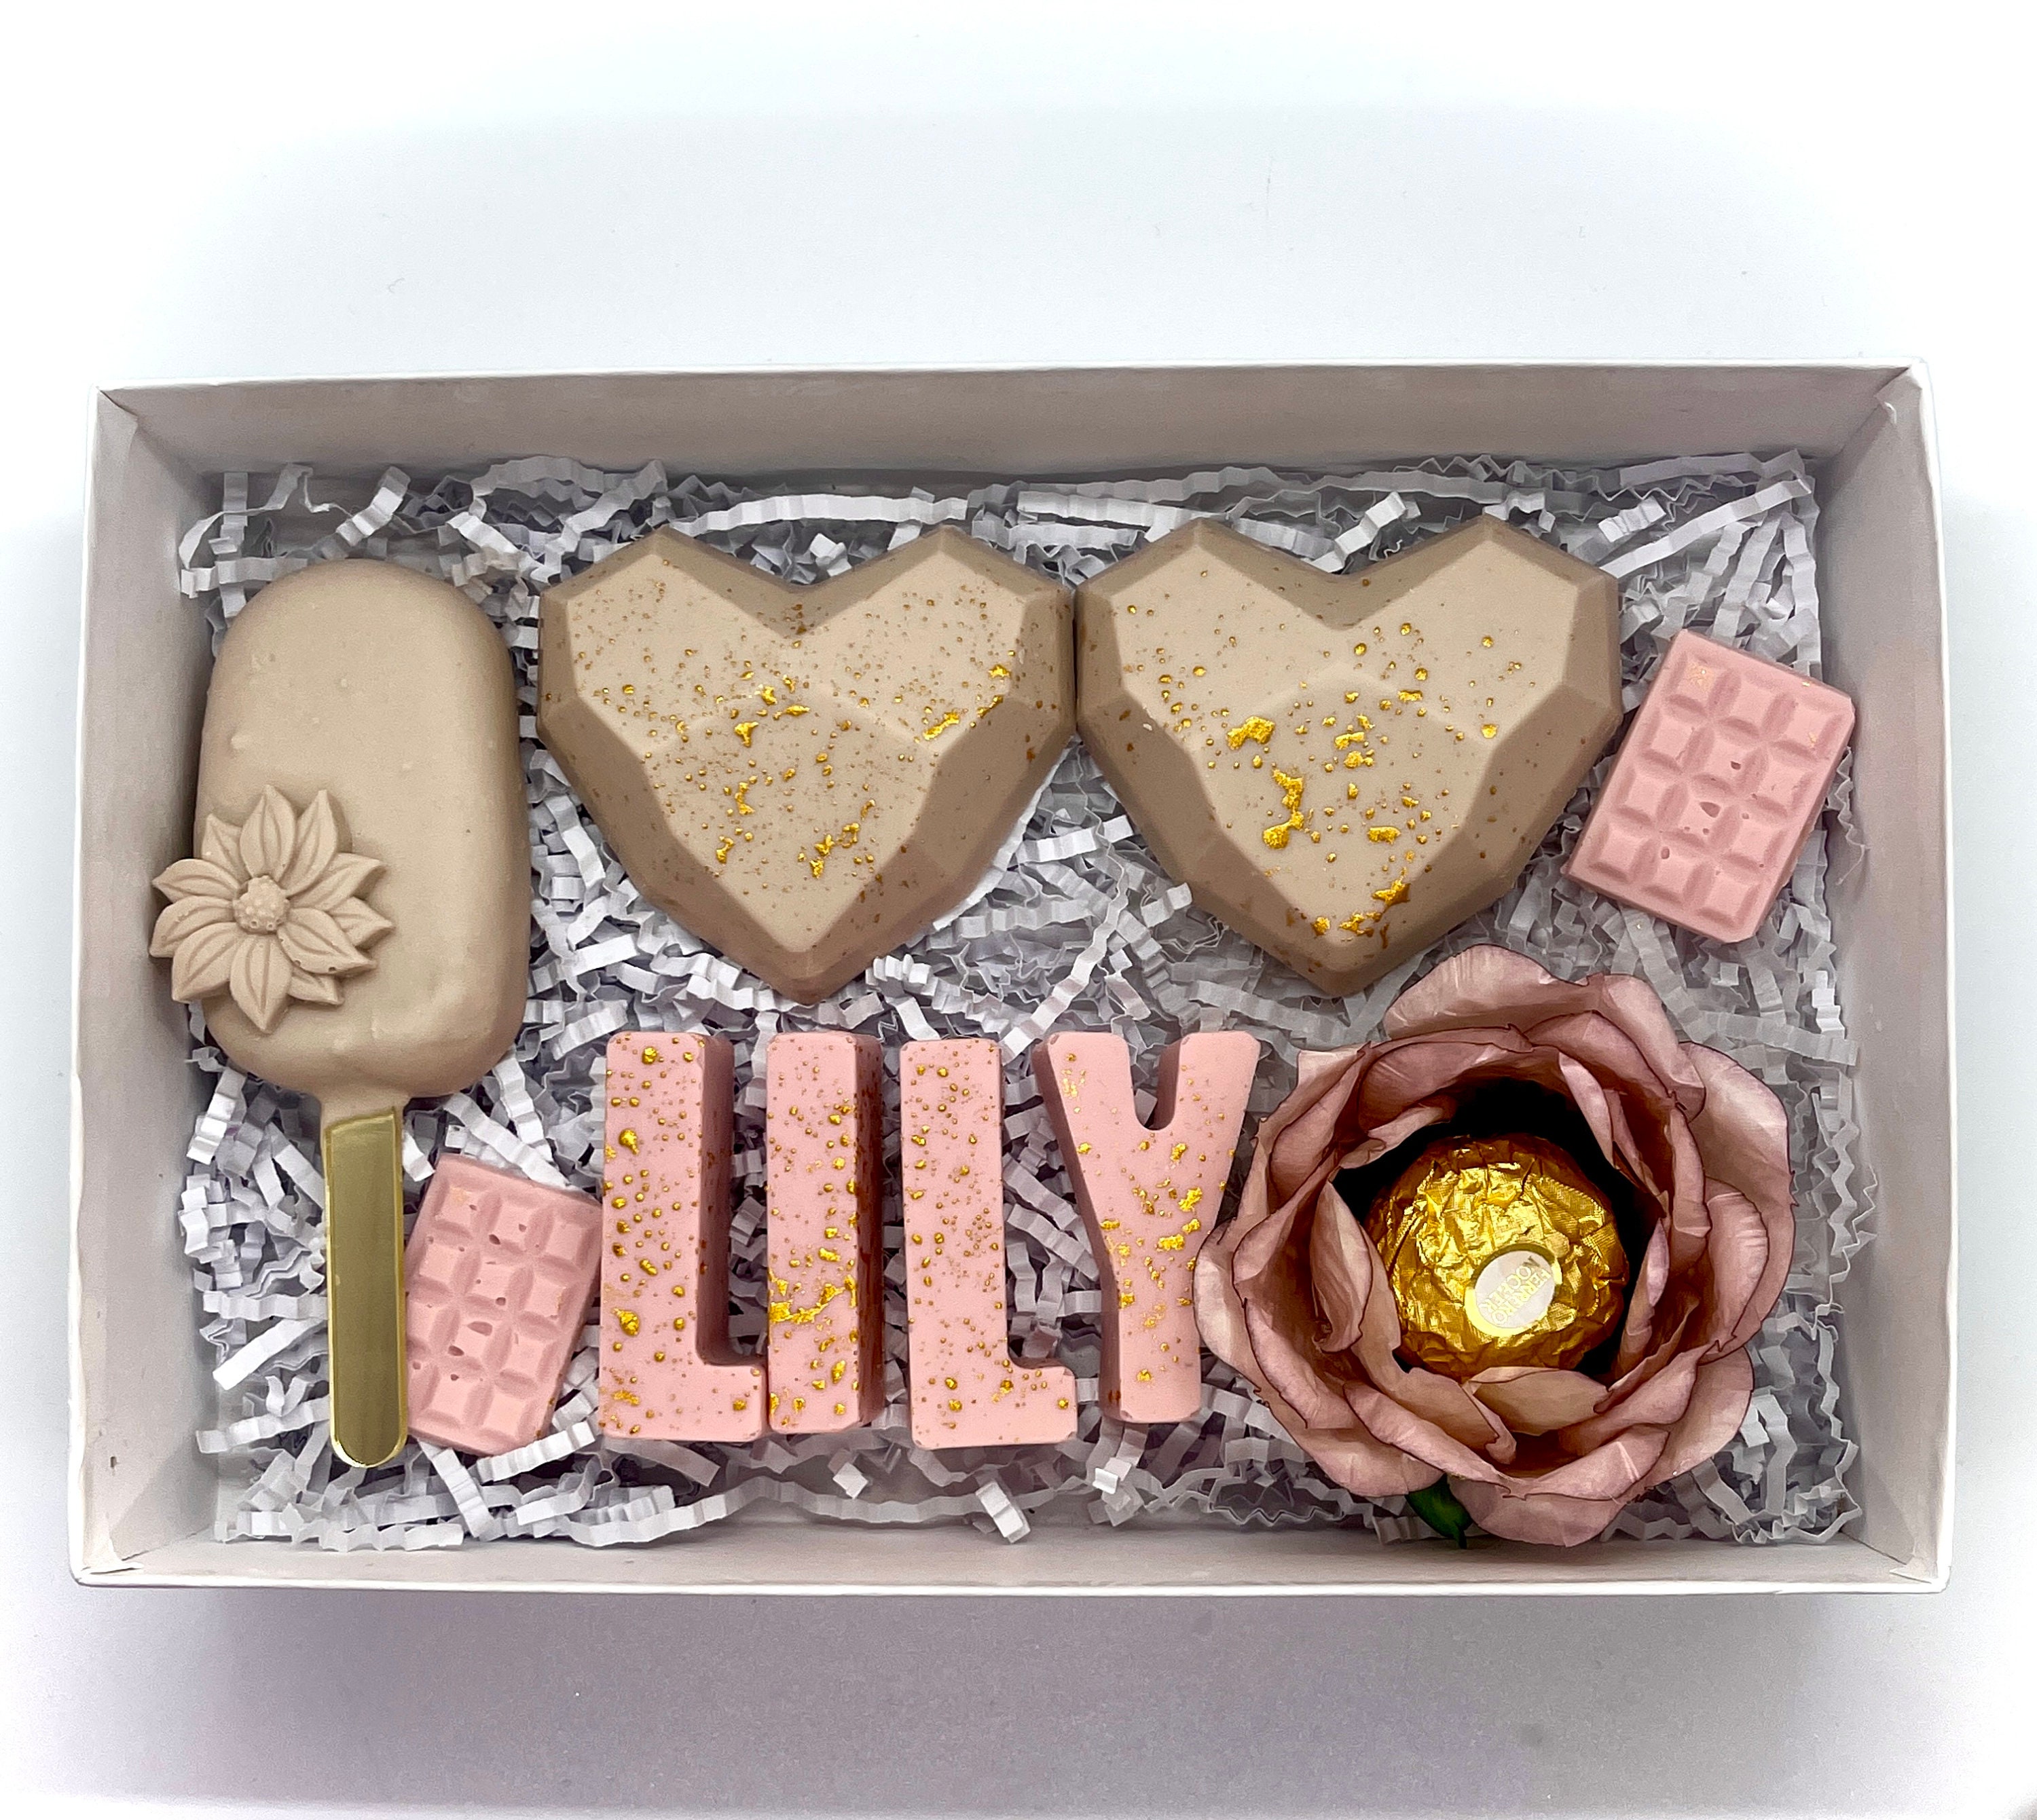 Assorted Treats Gift Box, I Love You Gift Girlfriend, Birthday Gifts for  Her, Friendship Gifts, Personalized Gifts, Cakesicle Treat Box 